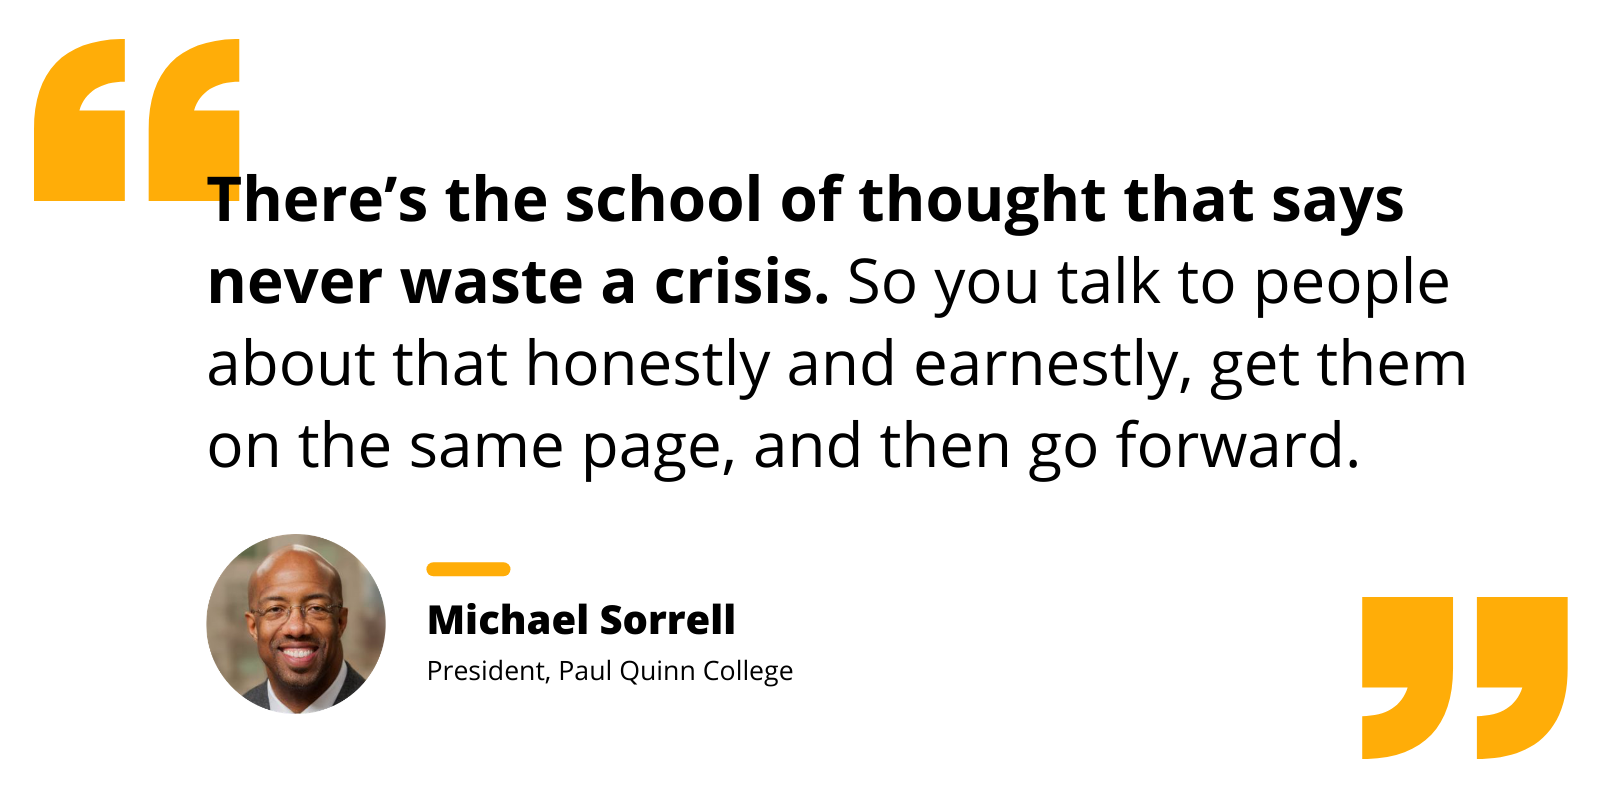 Quote by Michael Sorrell re: "never waste a crisis" as a unique opportunity for honest conversation and shared progress.